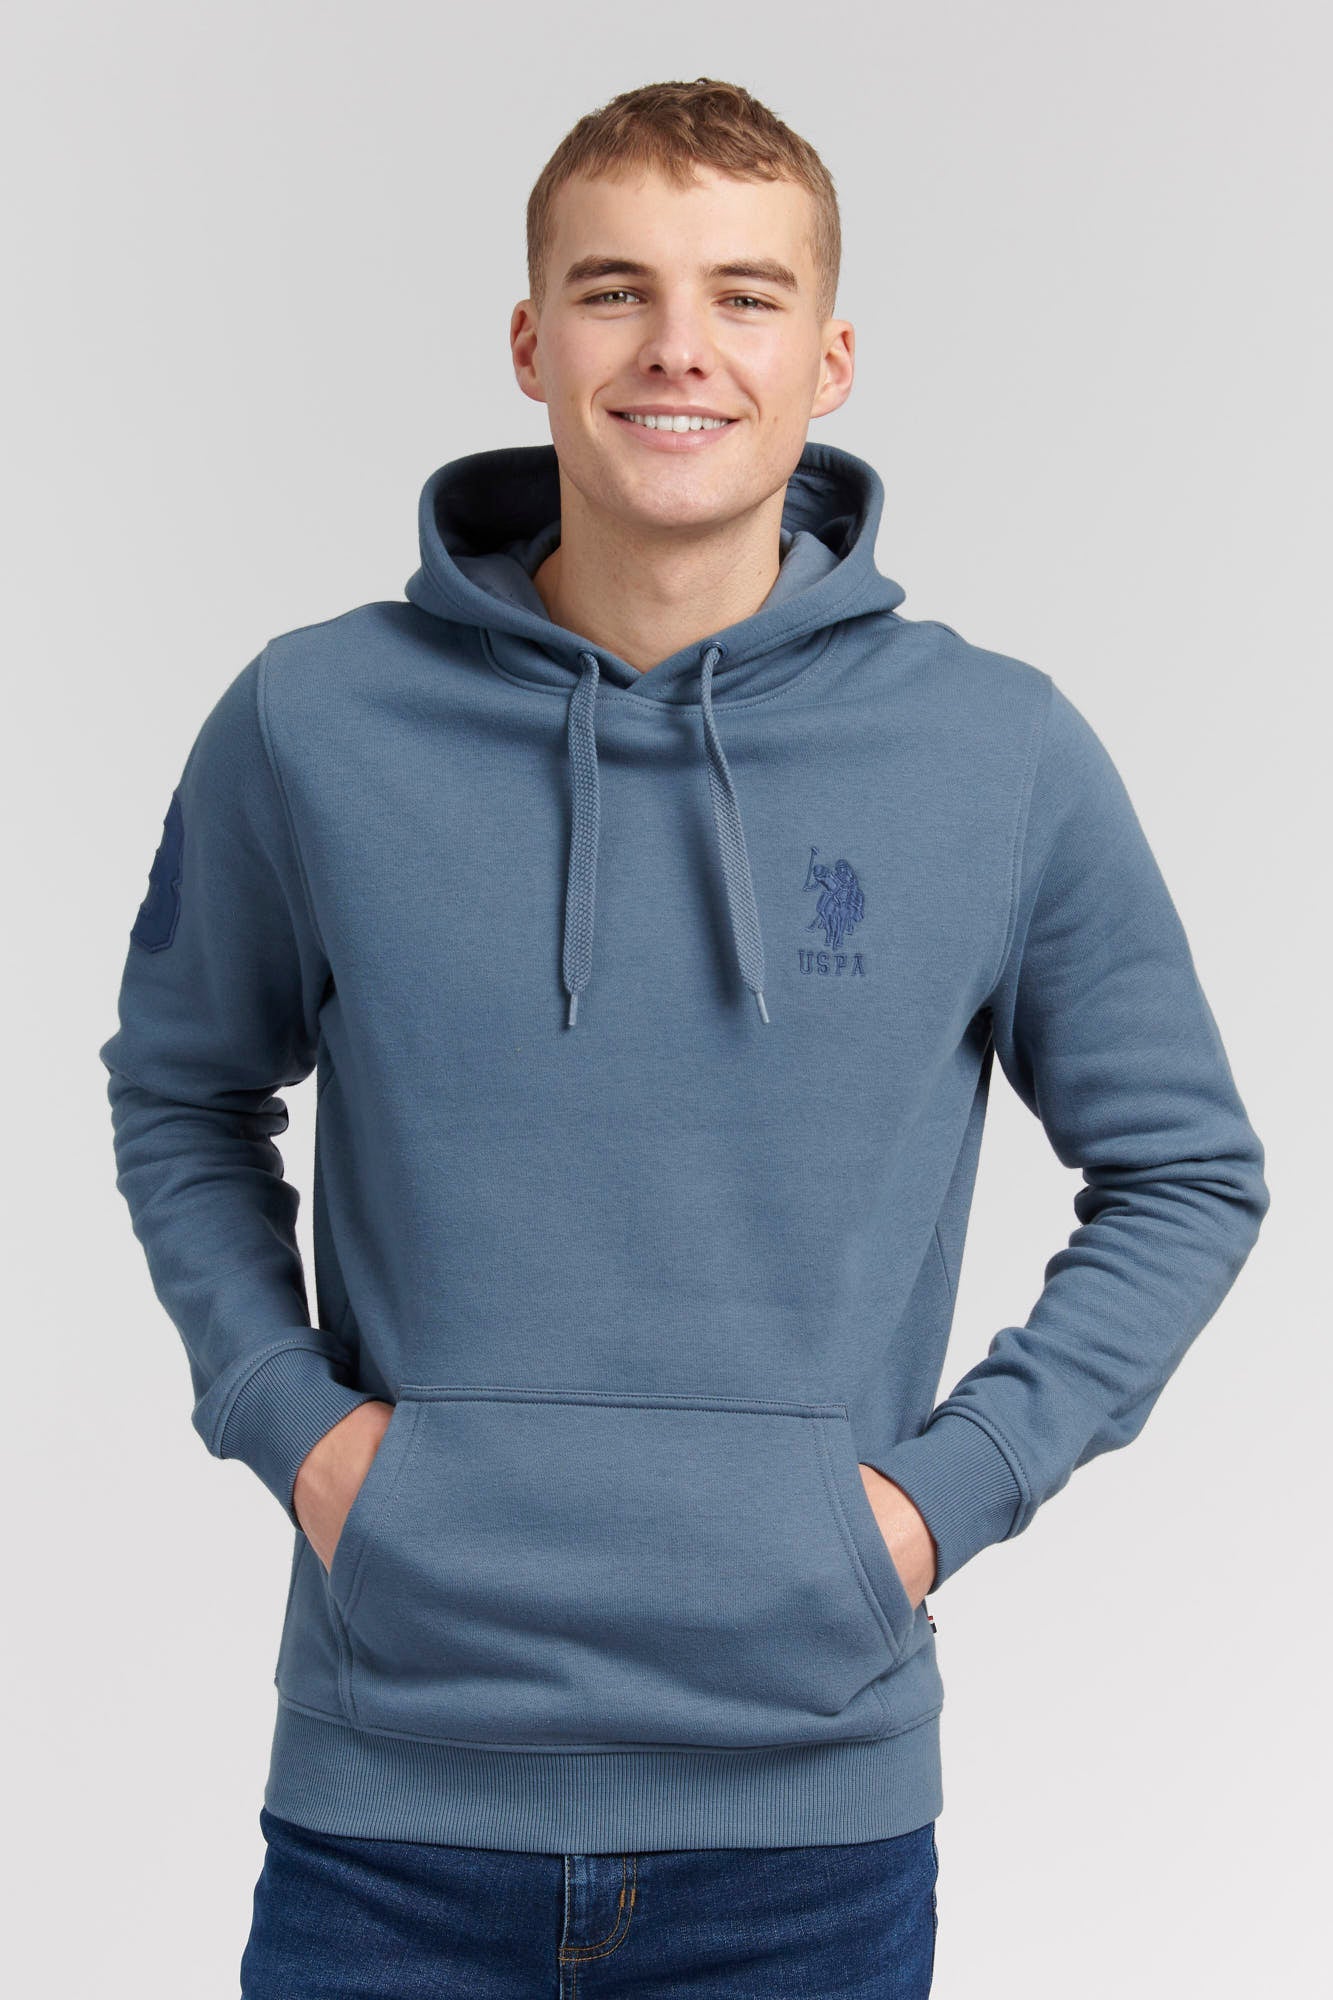 U.S. Polo Assn. Mens Player 3 Hoodie in China Blue